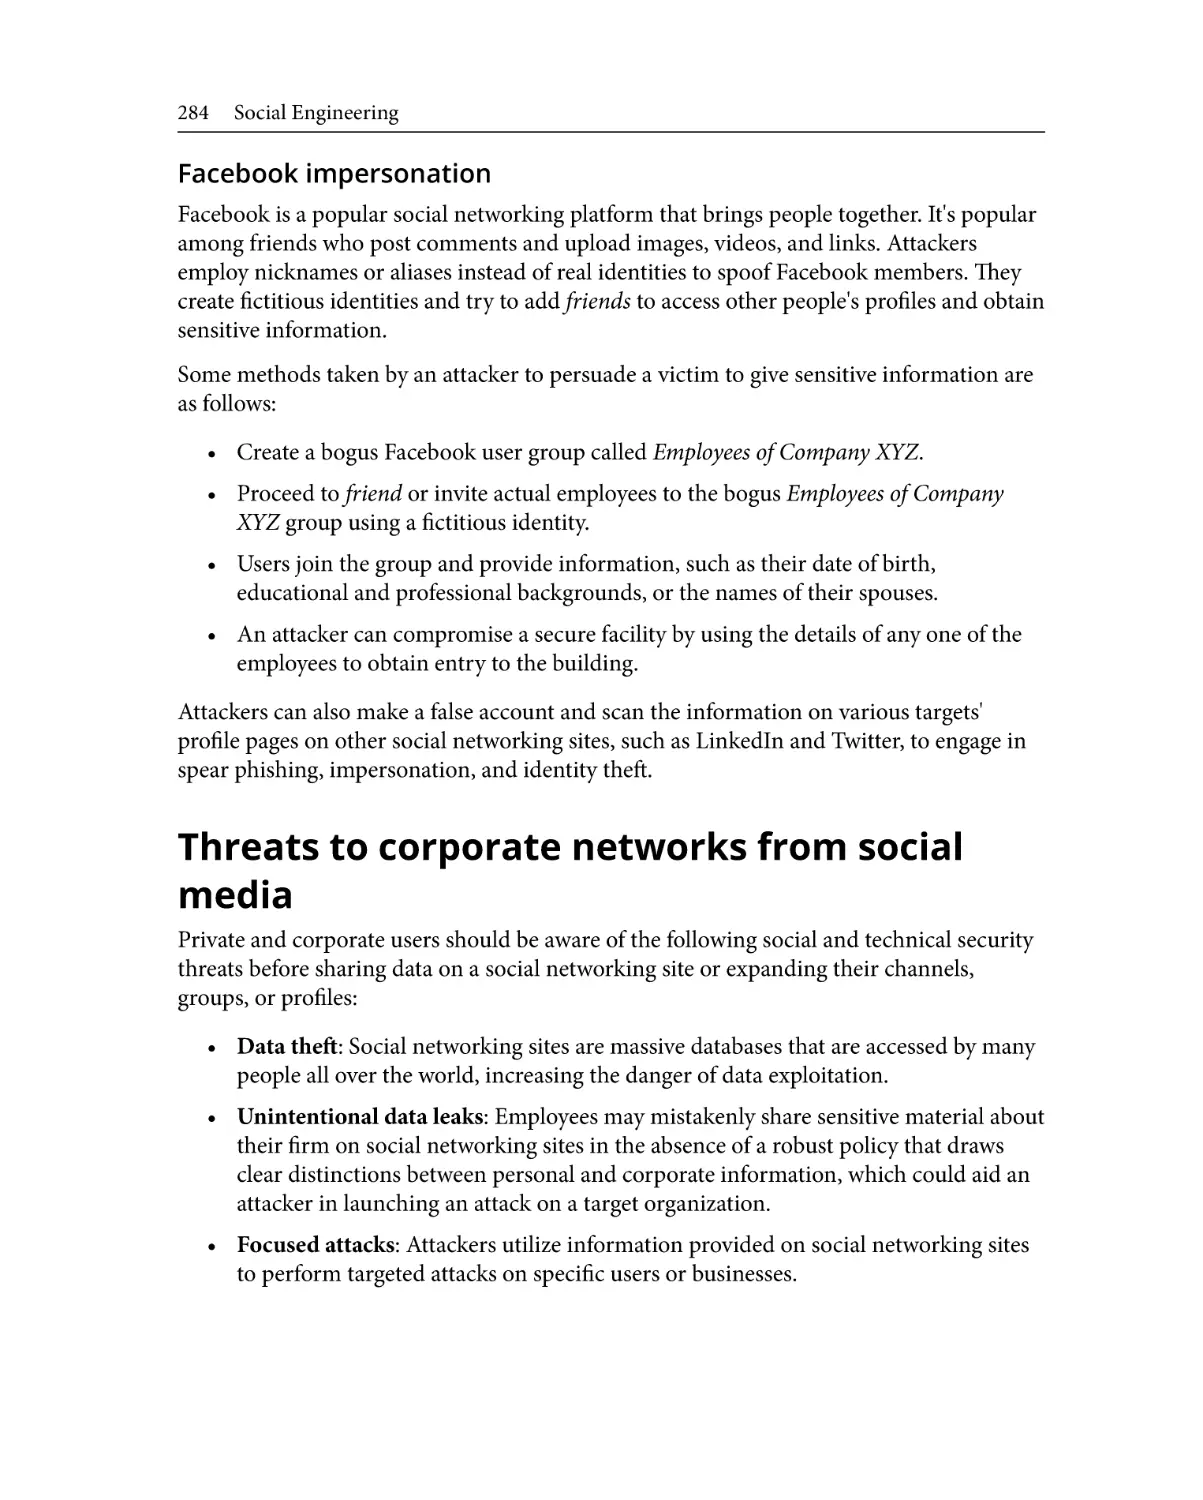 Threats to corporate networks from social media